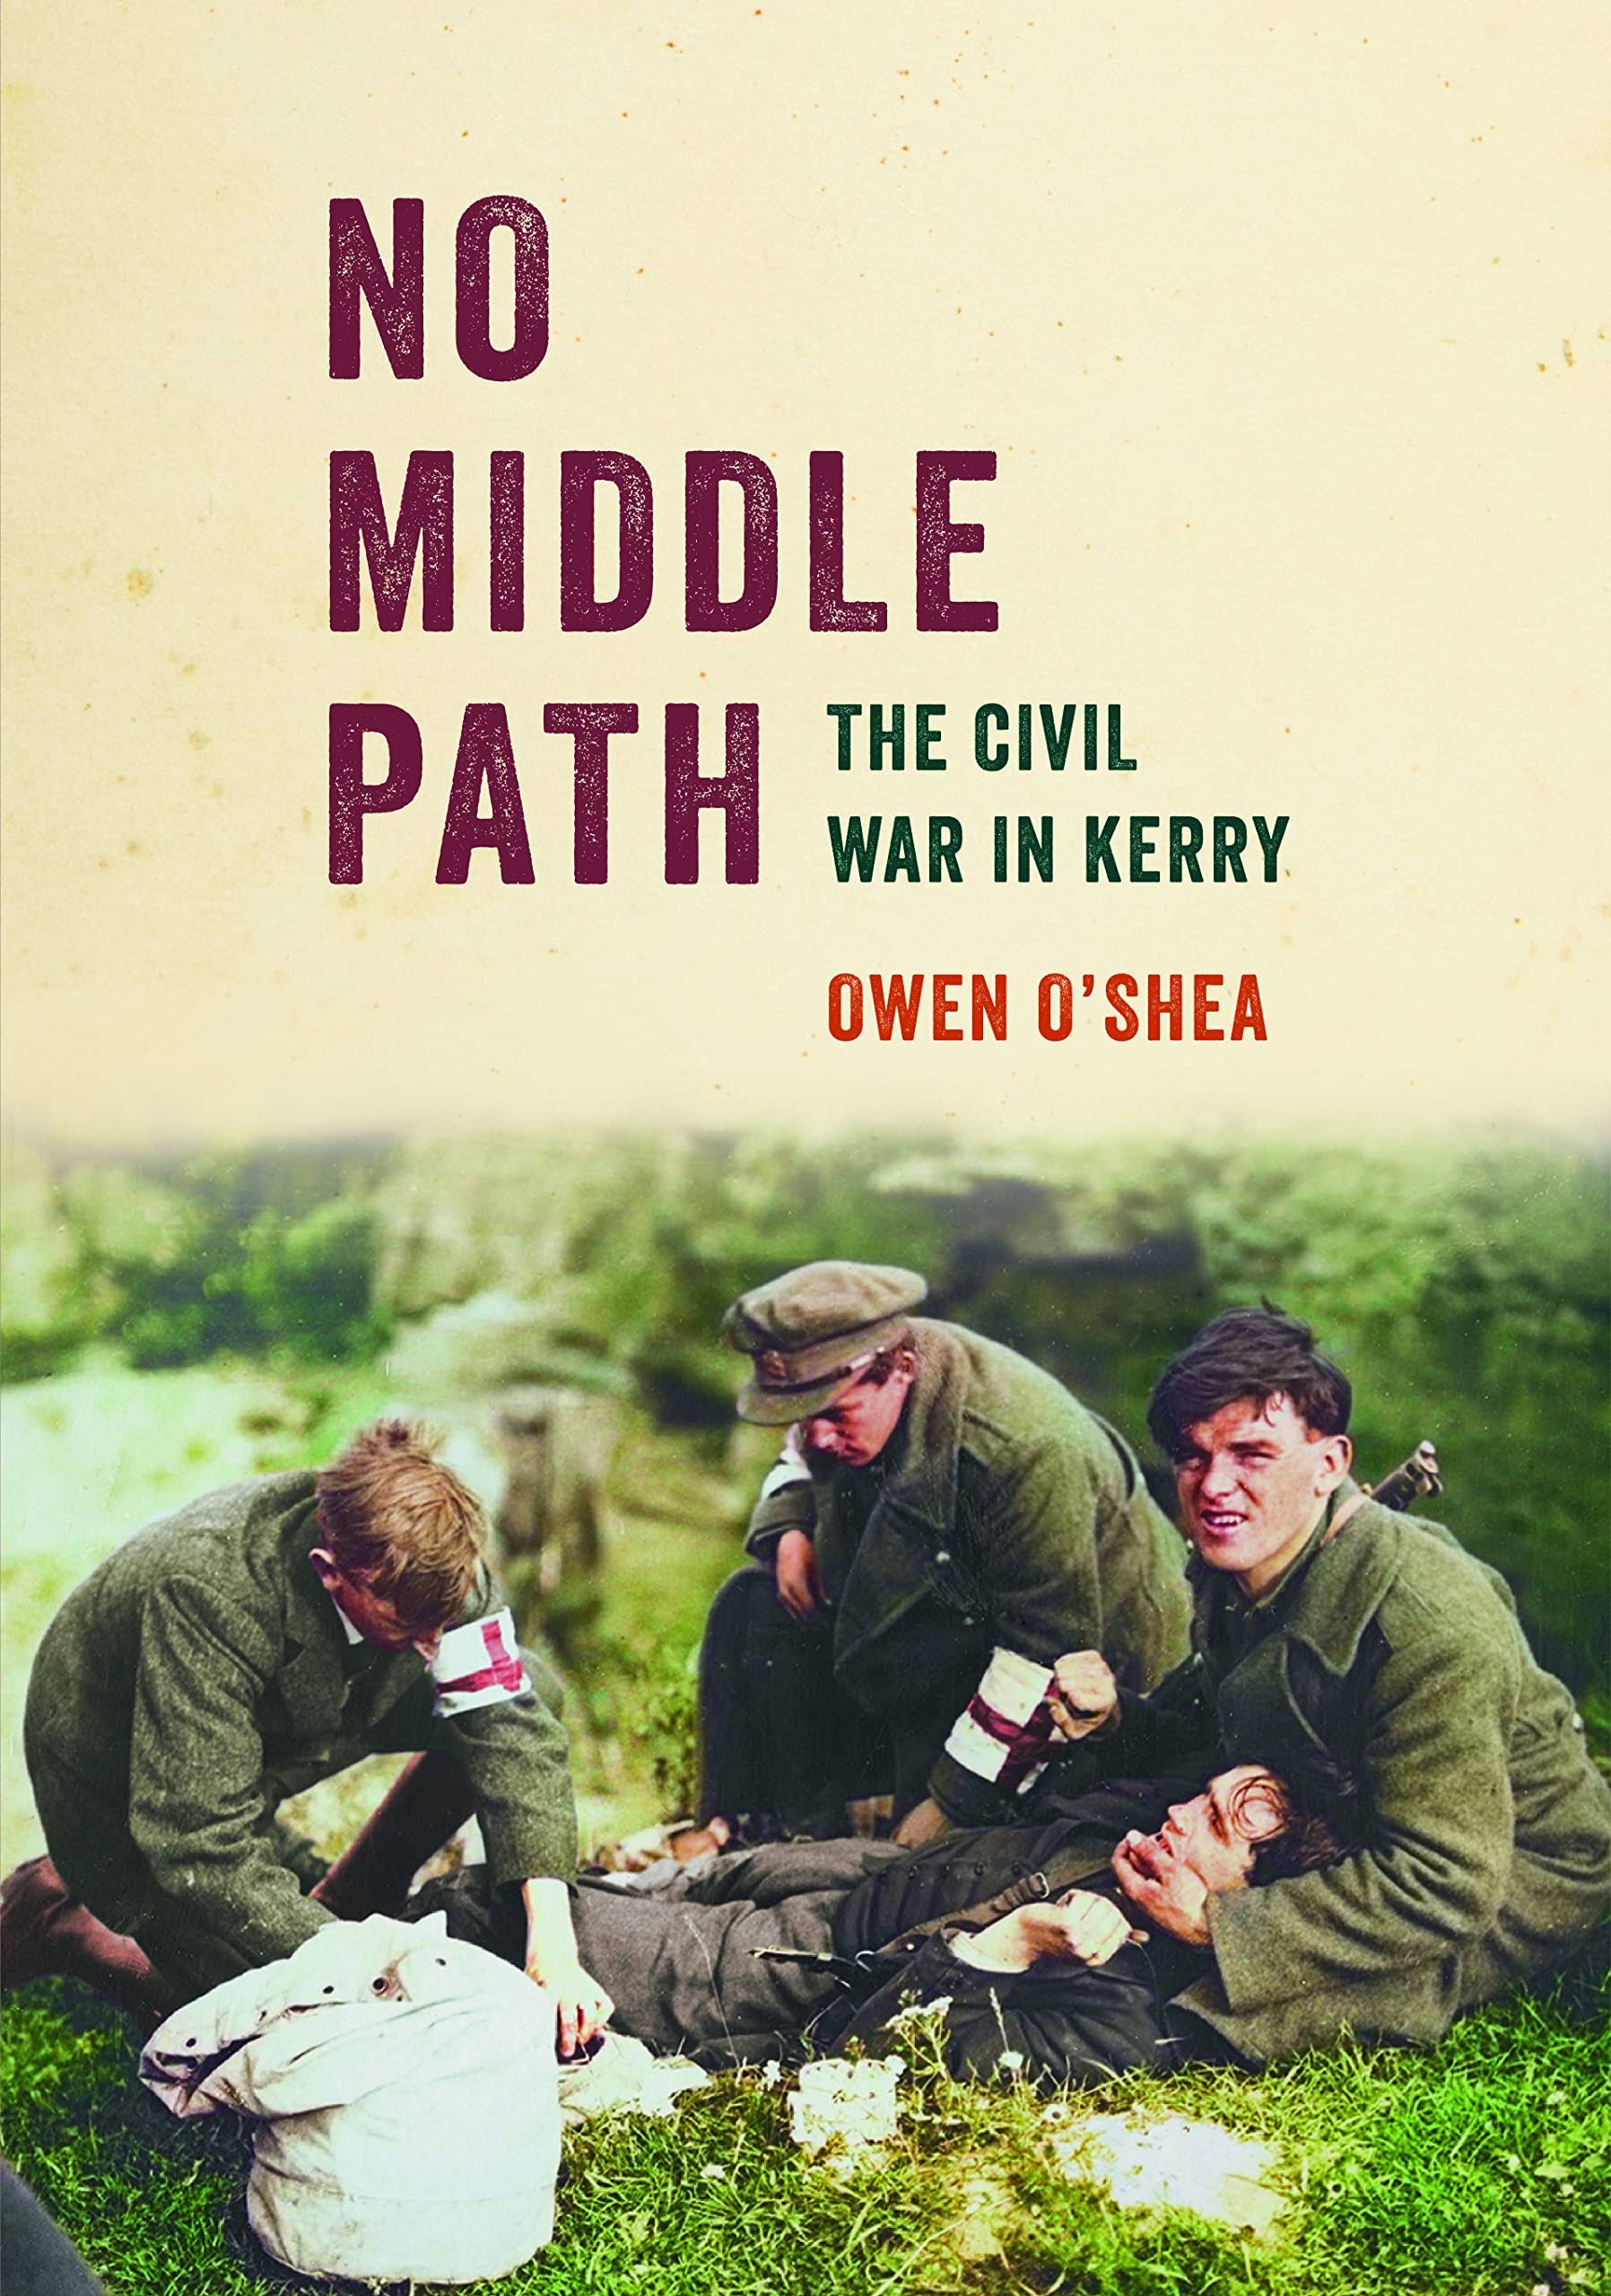 No Middle Path: The Civil War in Kerry [Book]